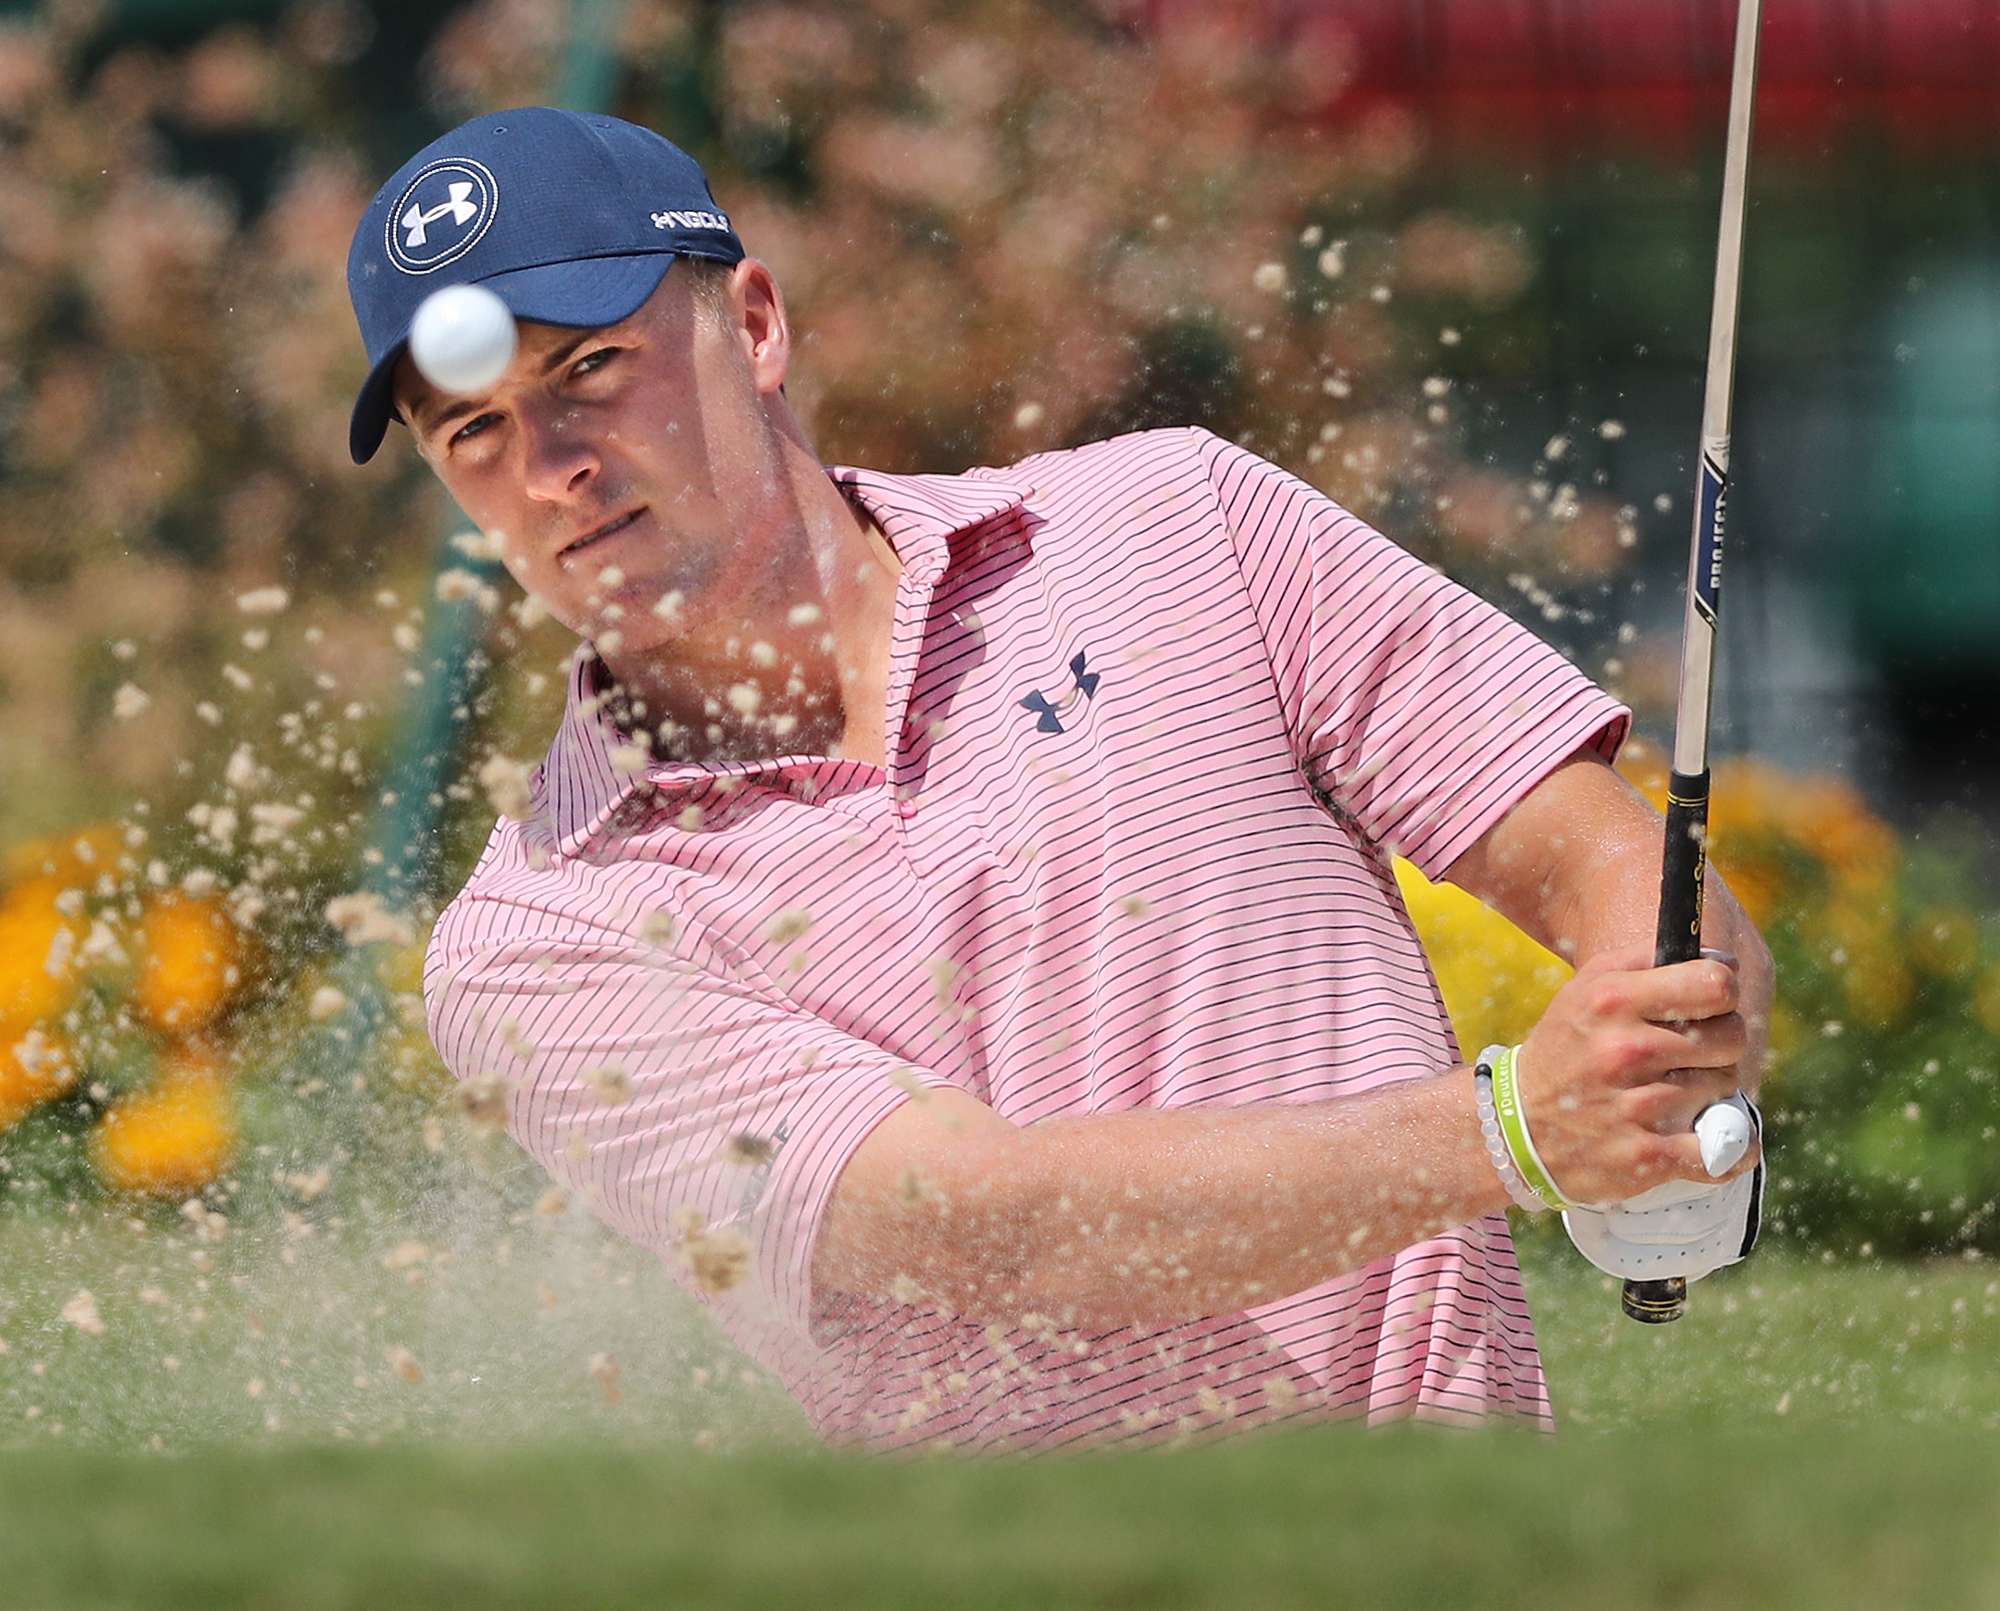 Jordan Spieth hits sand shots to the practice green while preparing to defend his Tour Championship title at East Lake Golf Club in Atlanta on Tuesday. Photo: AP